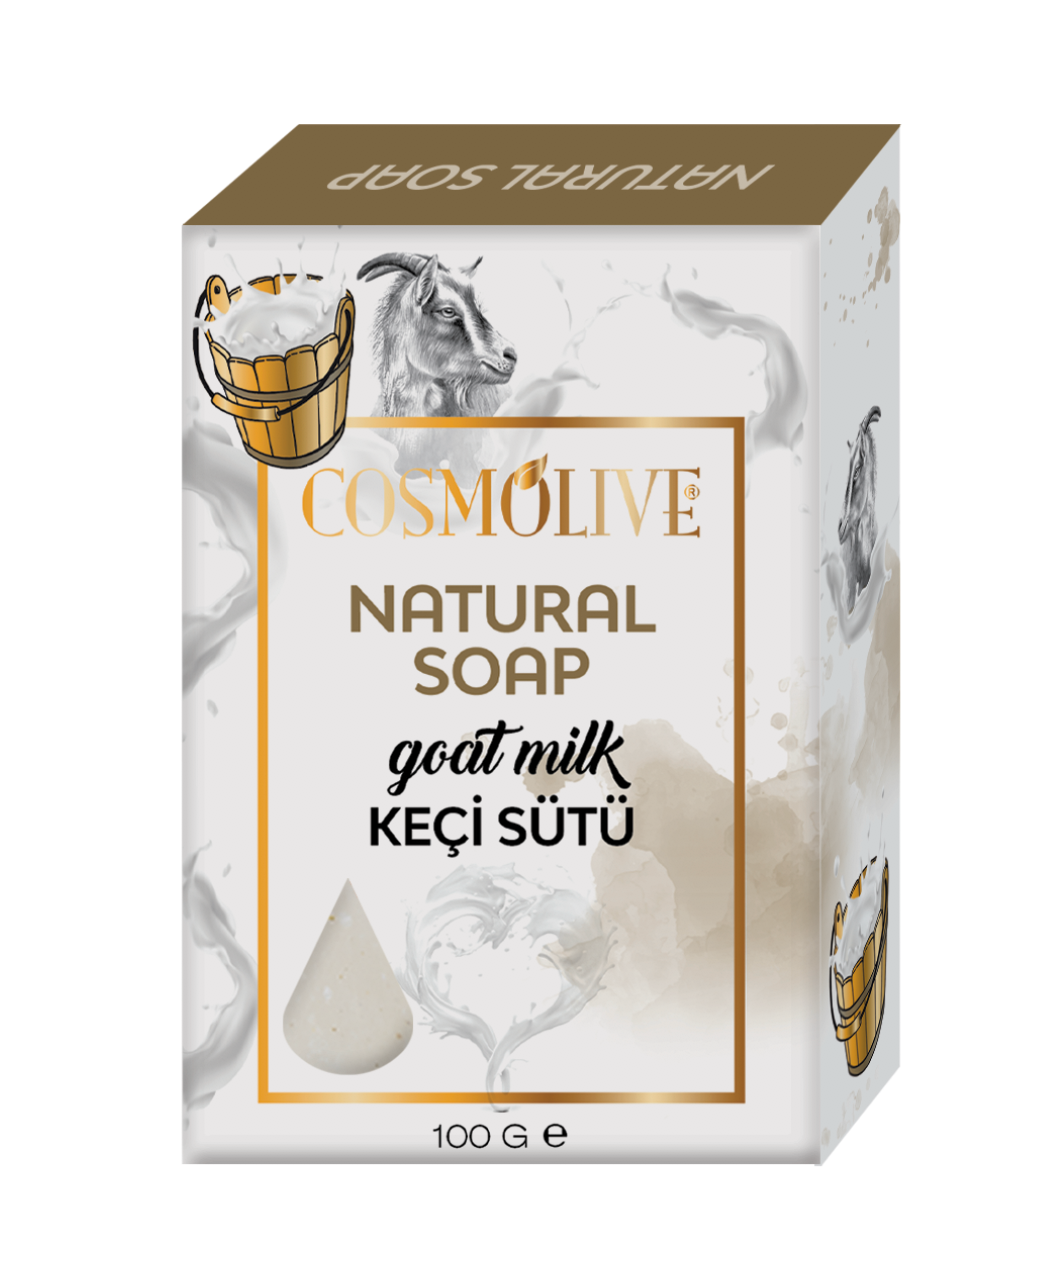 COSMOLIVE GOAT MILK NATURAL SOAP 100 g / With Protein / Against Skin Problems / Moisture Balance / Natural Life